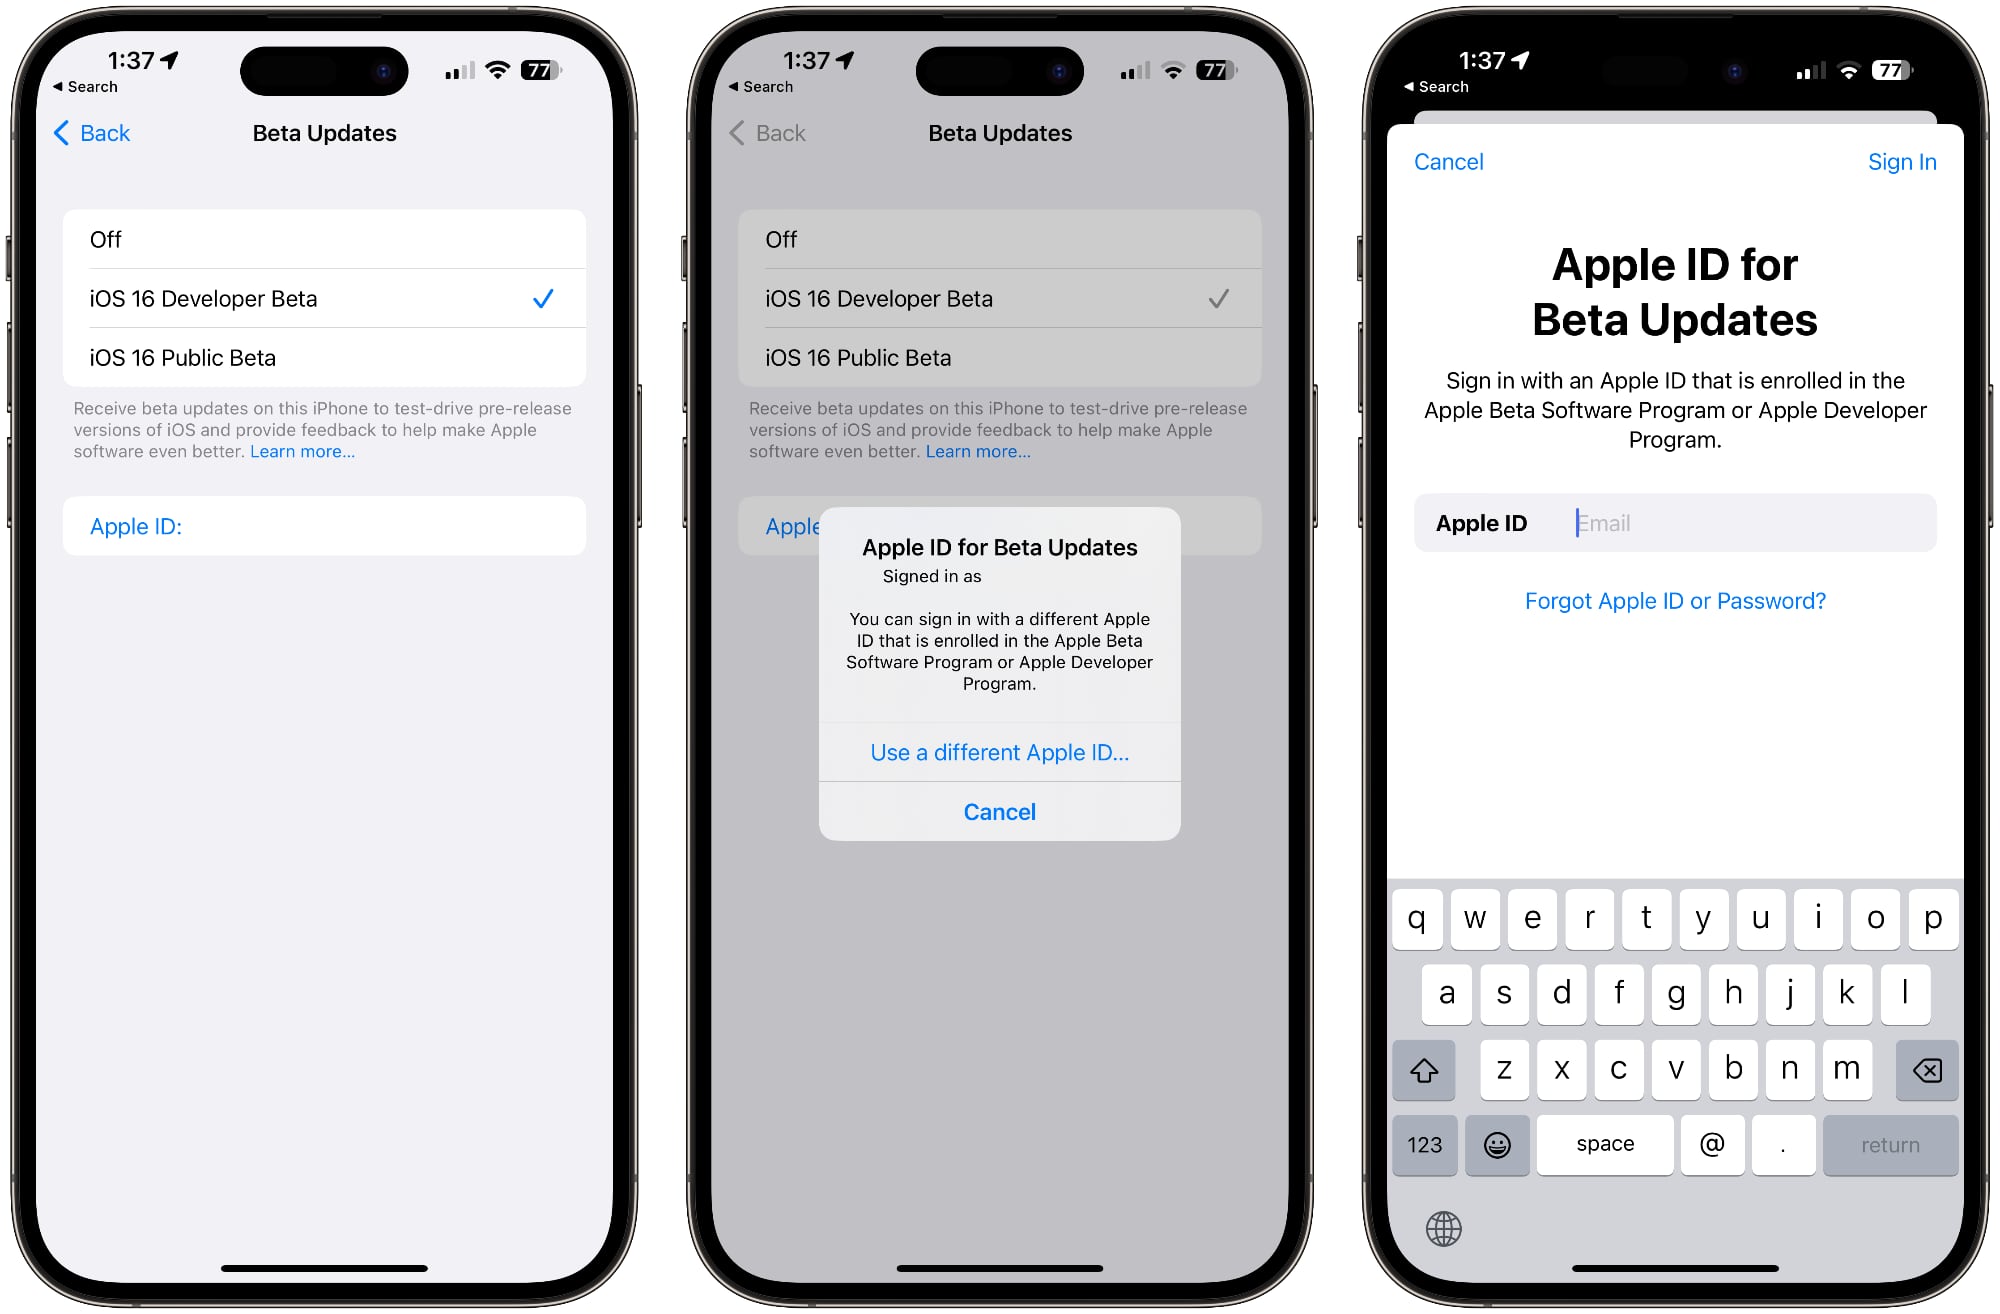 iOS 16.4 Will Let You Specify an Apple ID to Use for Beta Access